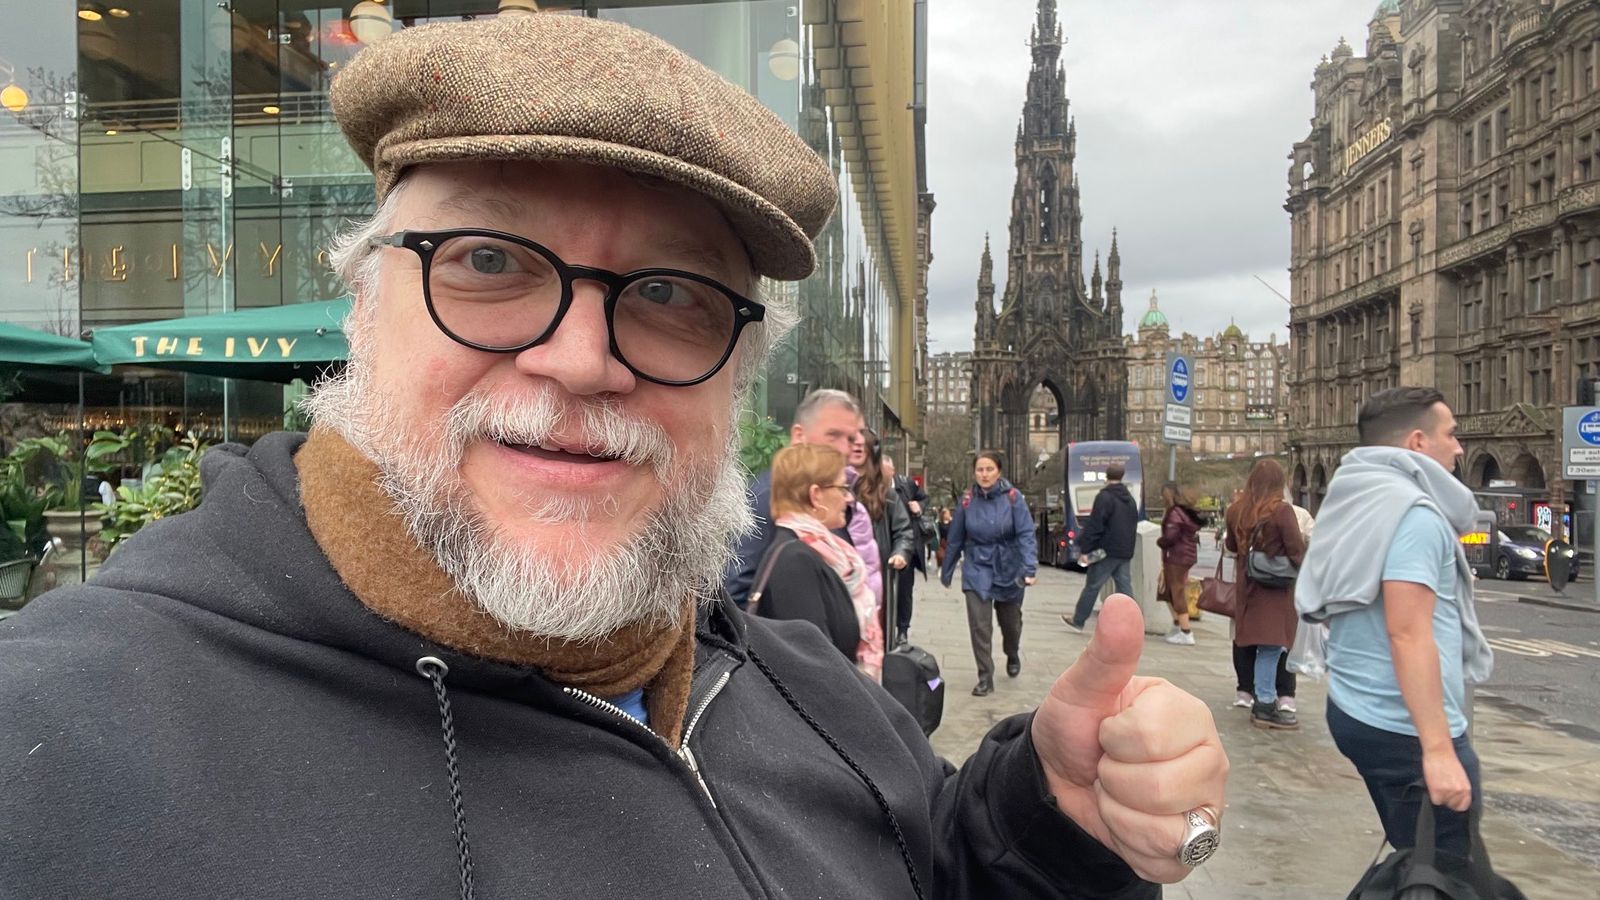 Pinocchio director Guillermo del Toro ‘scouting for areas’ in Edinburgh as he shares selfie